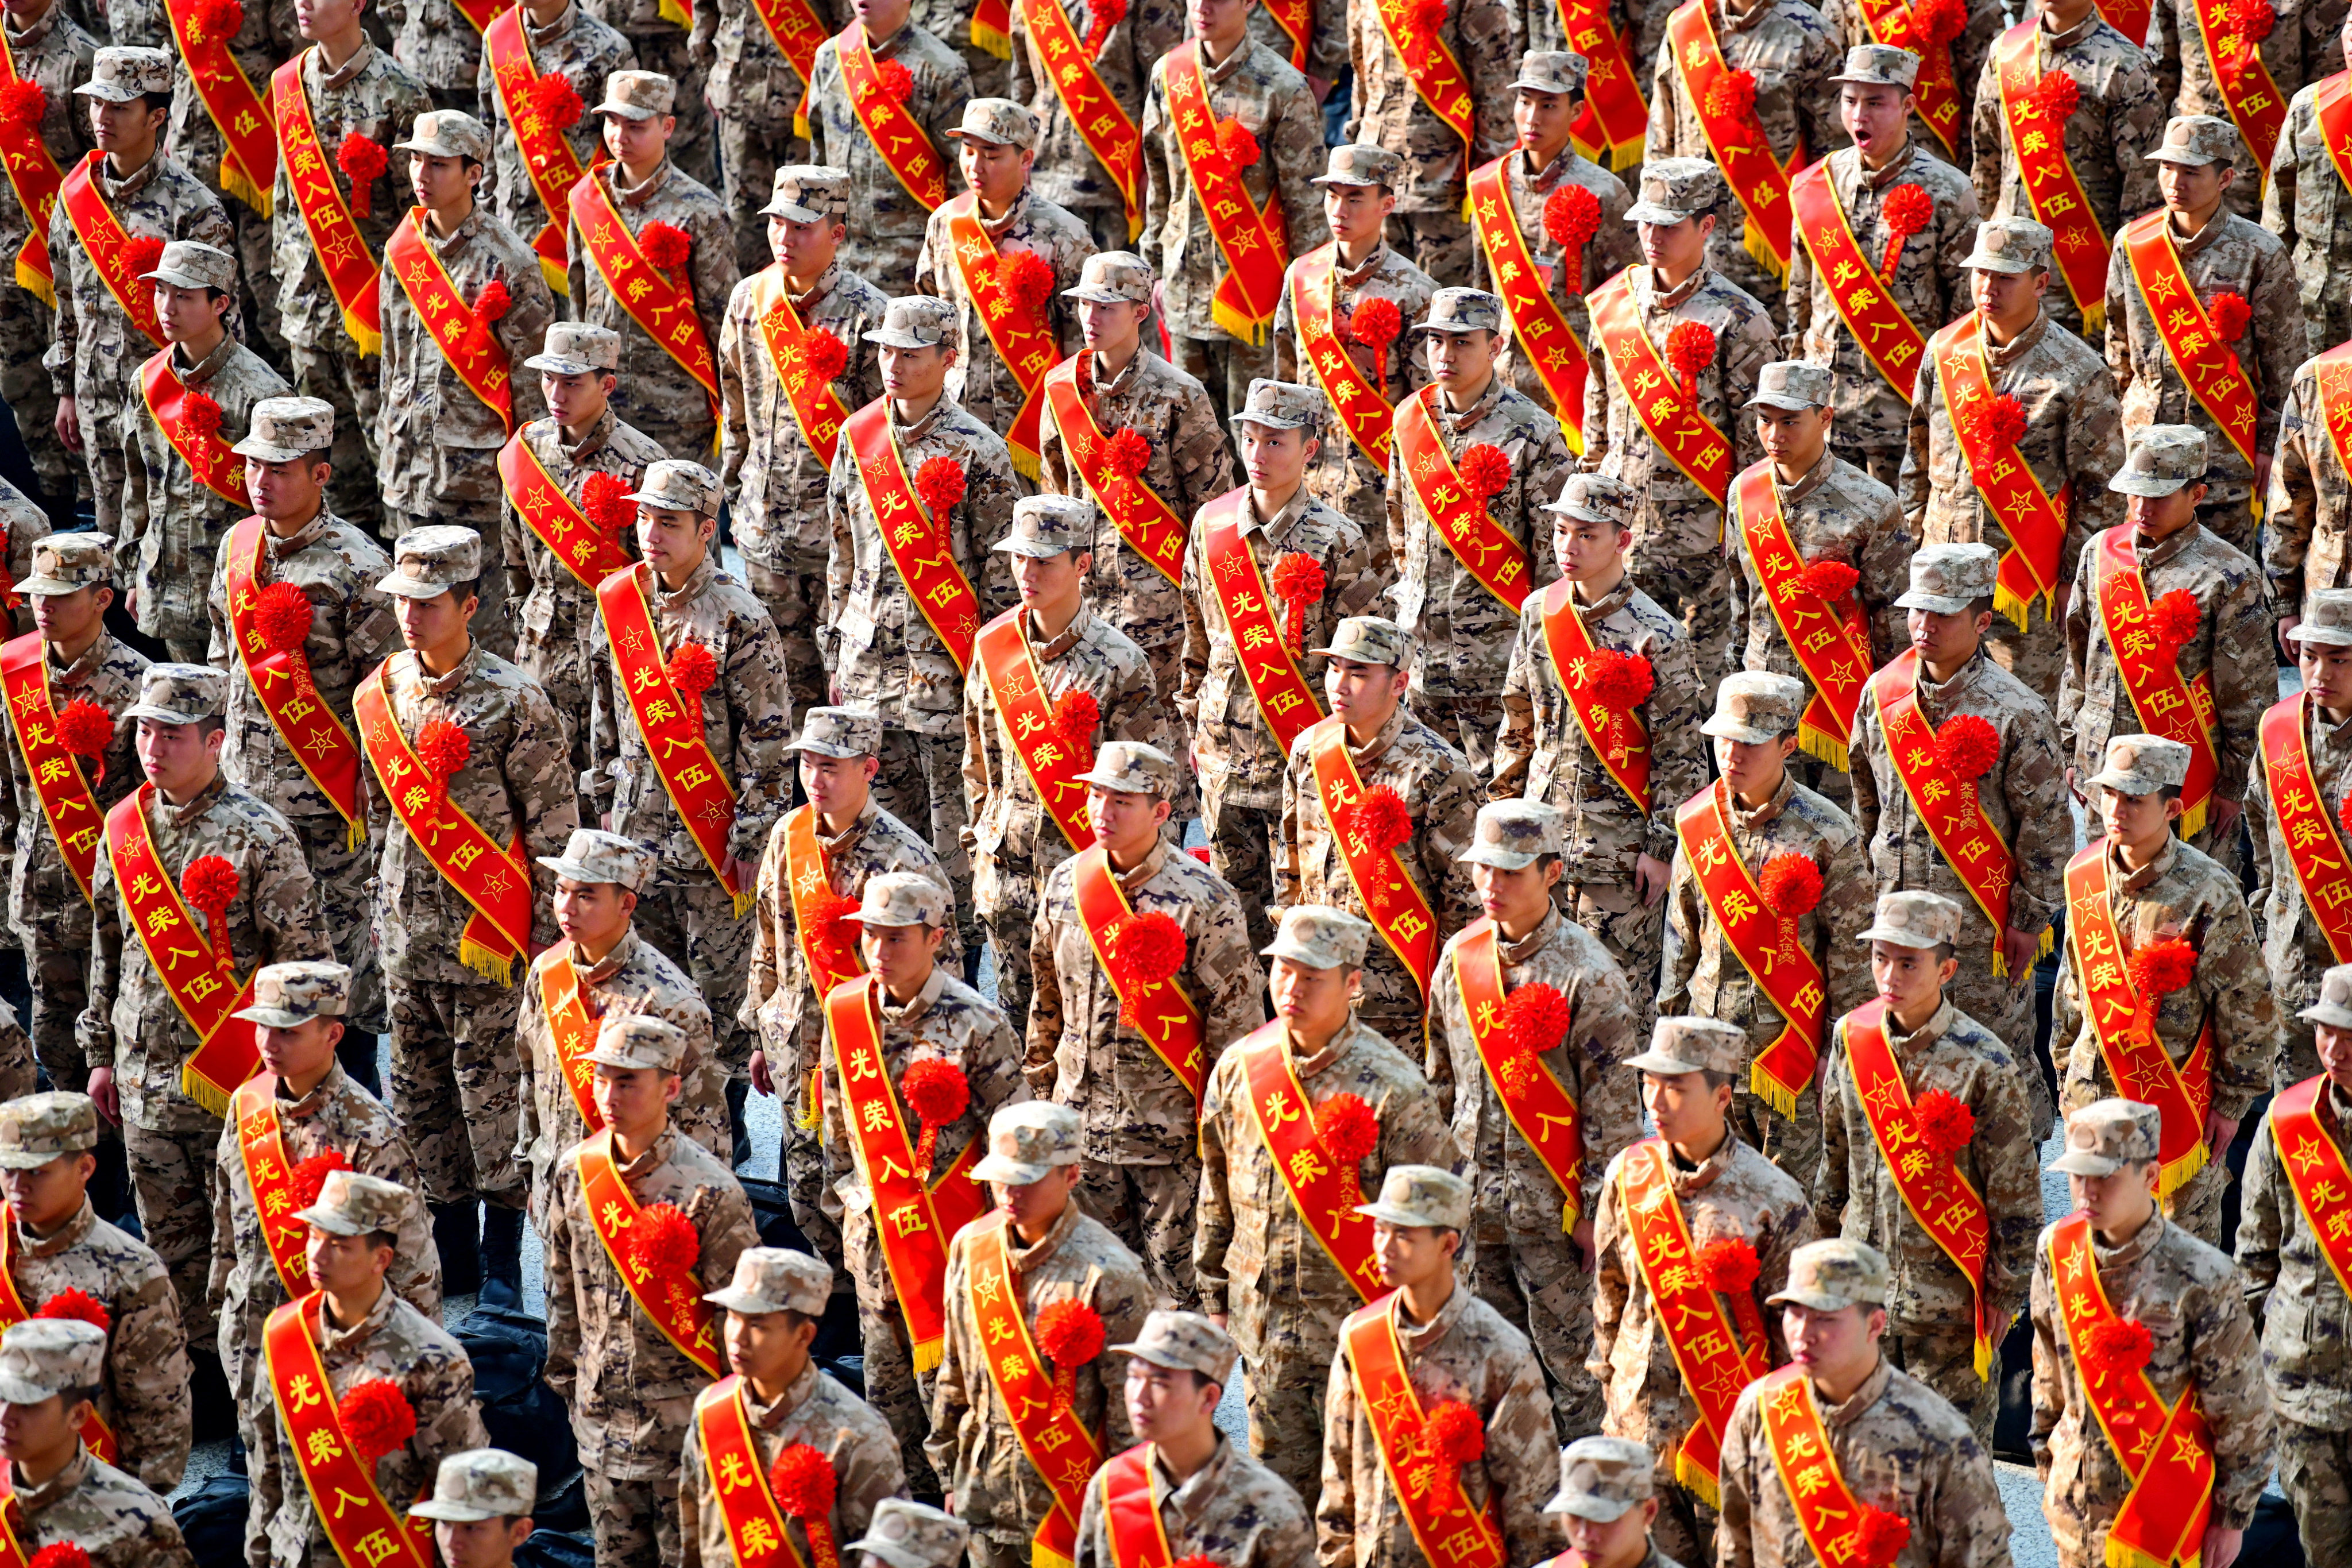 As the world’s biggest military, the PLA aims to become a modern fighting force by 2027. Photo: via Reuters